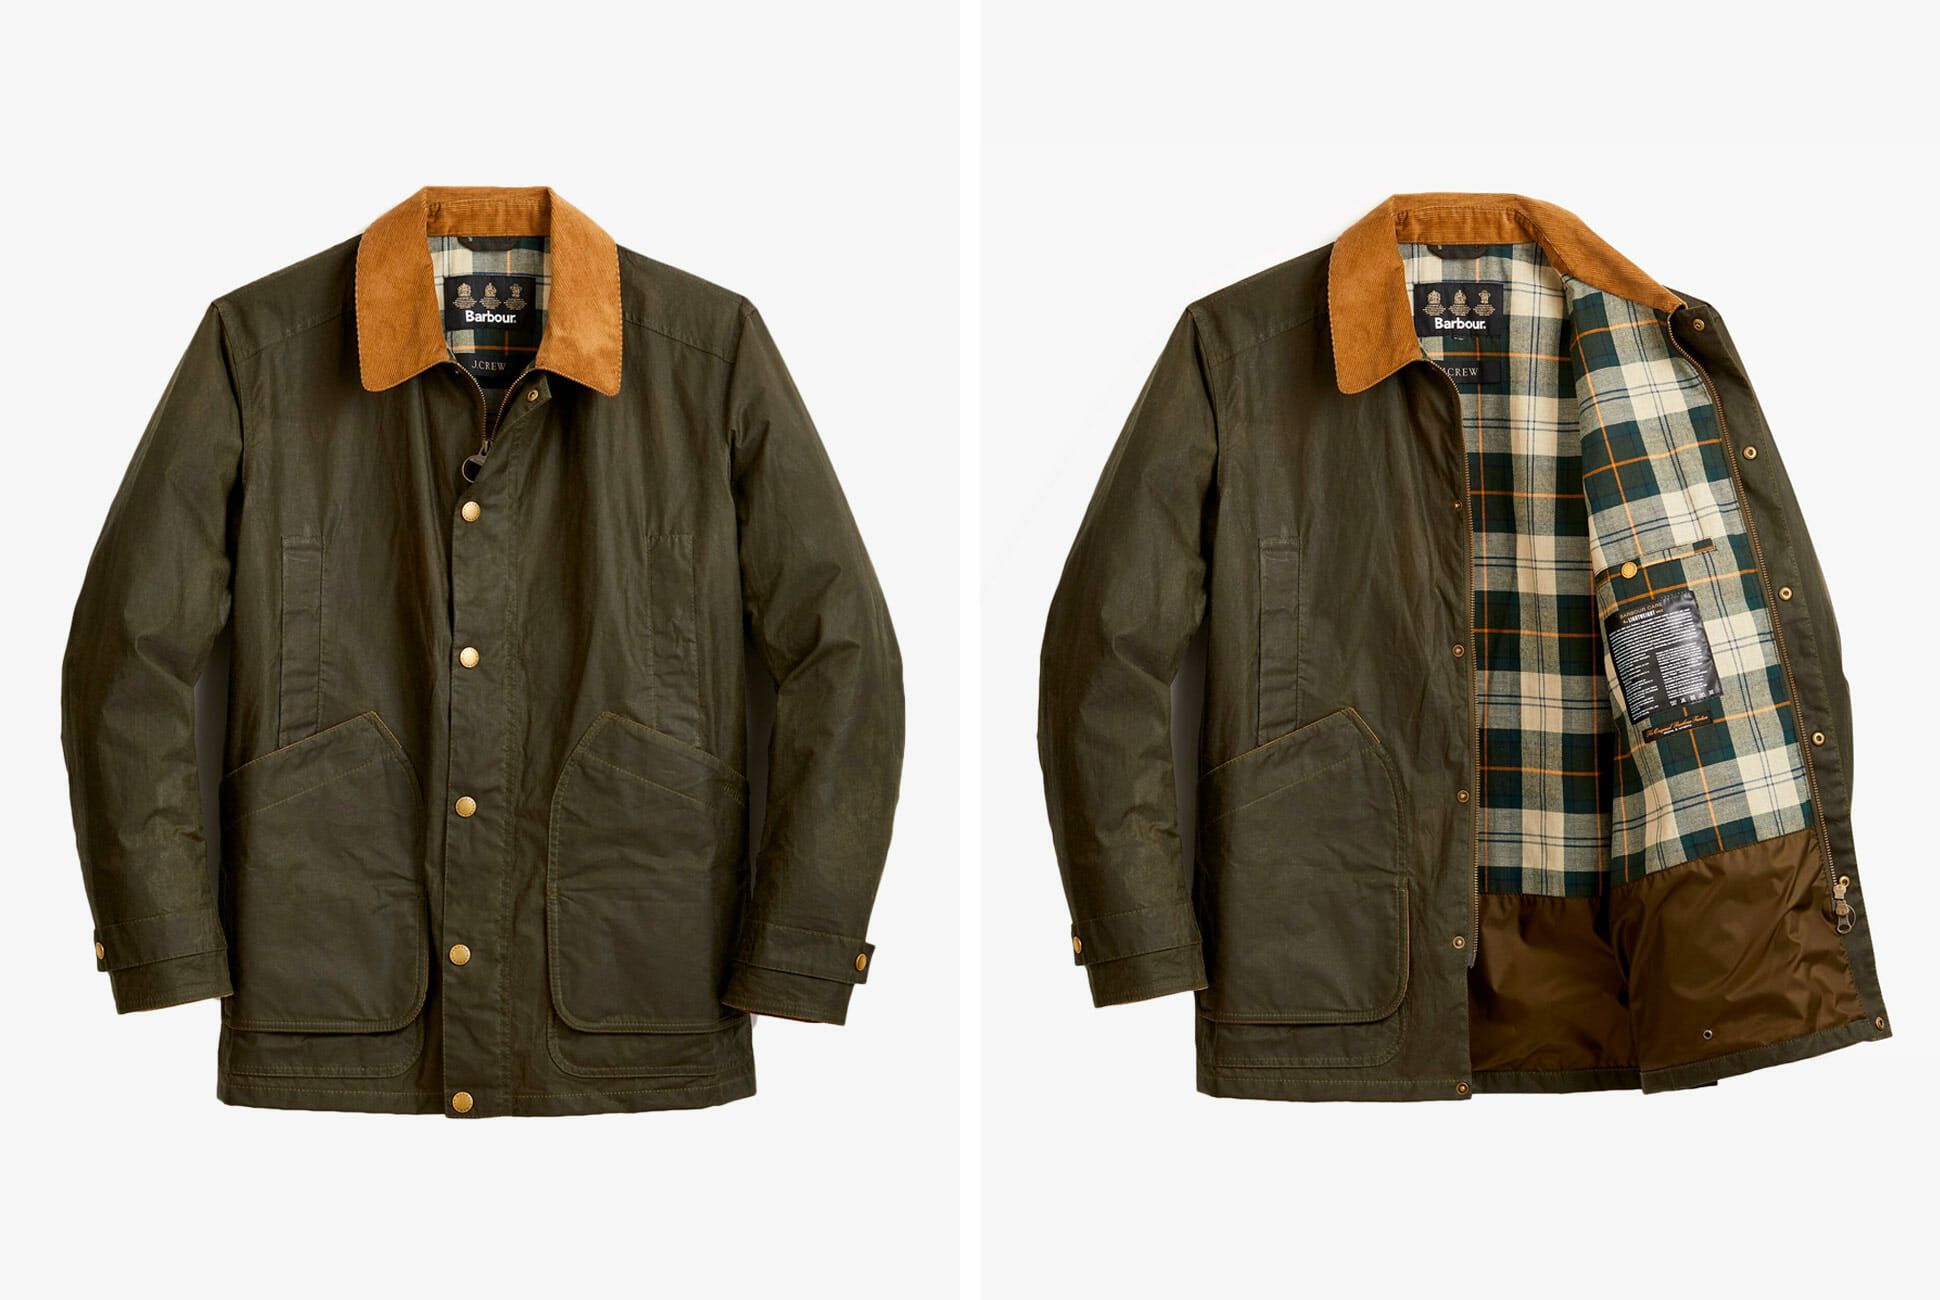 J.Crew and Barbour Teamed Up to Make 